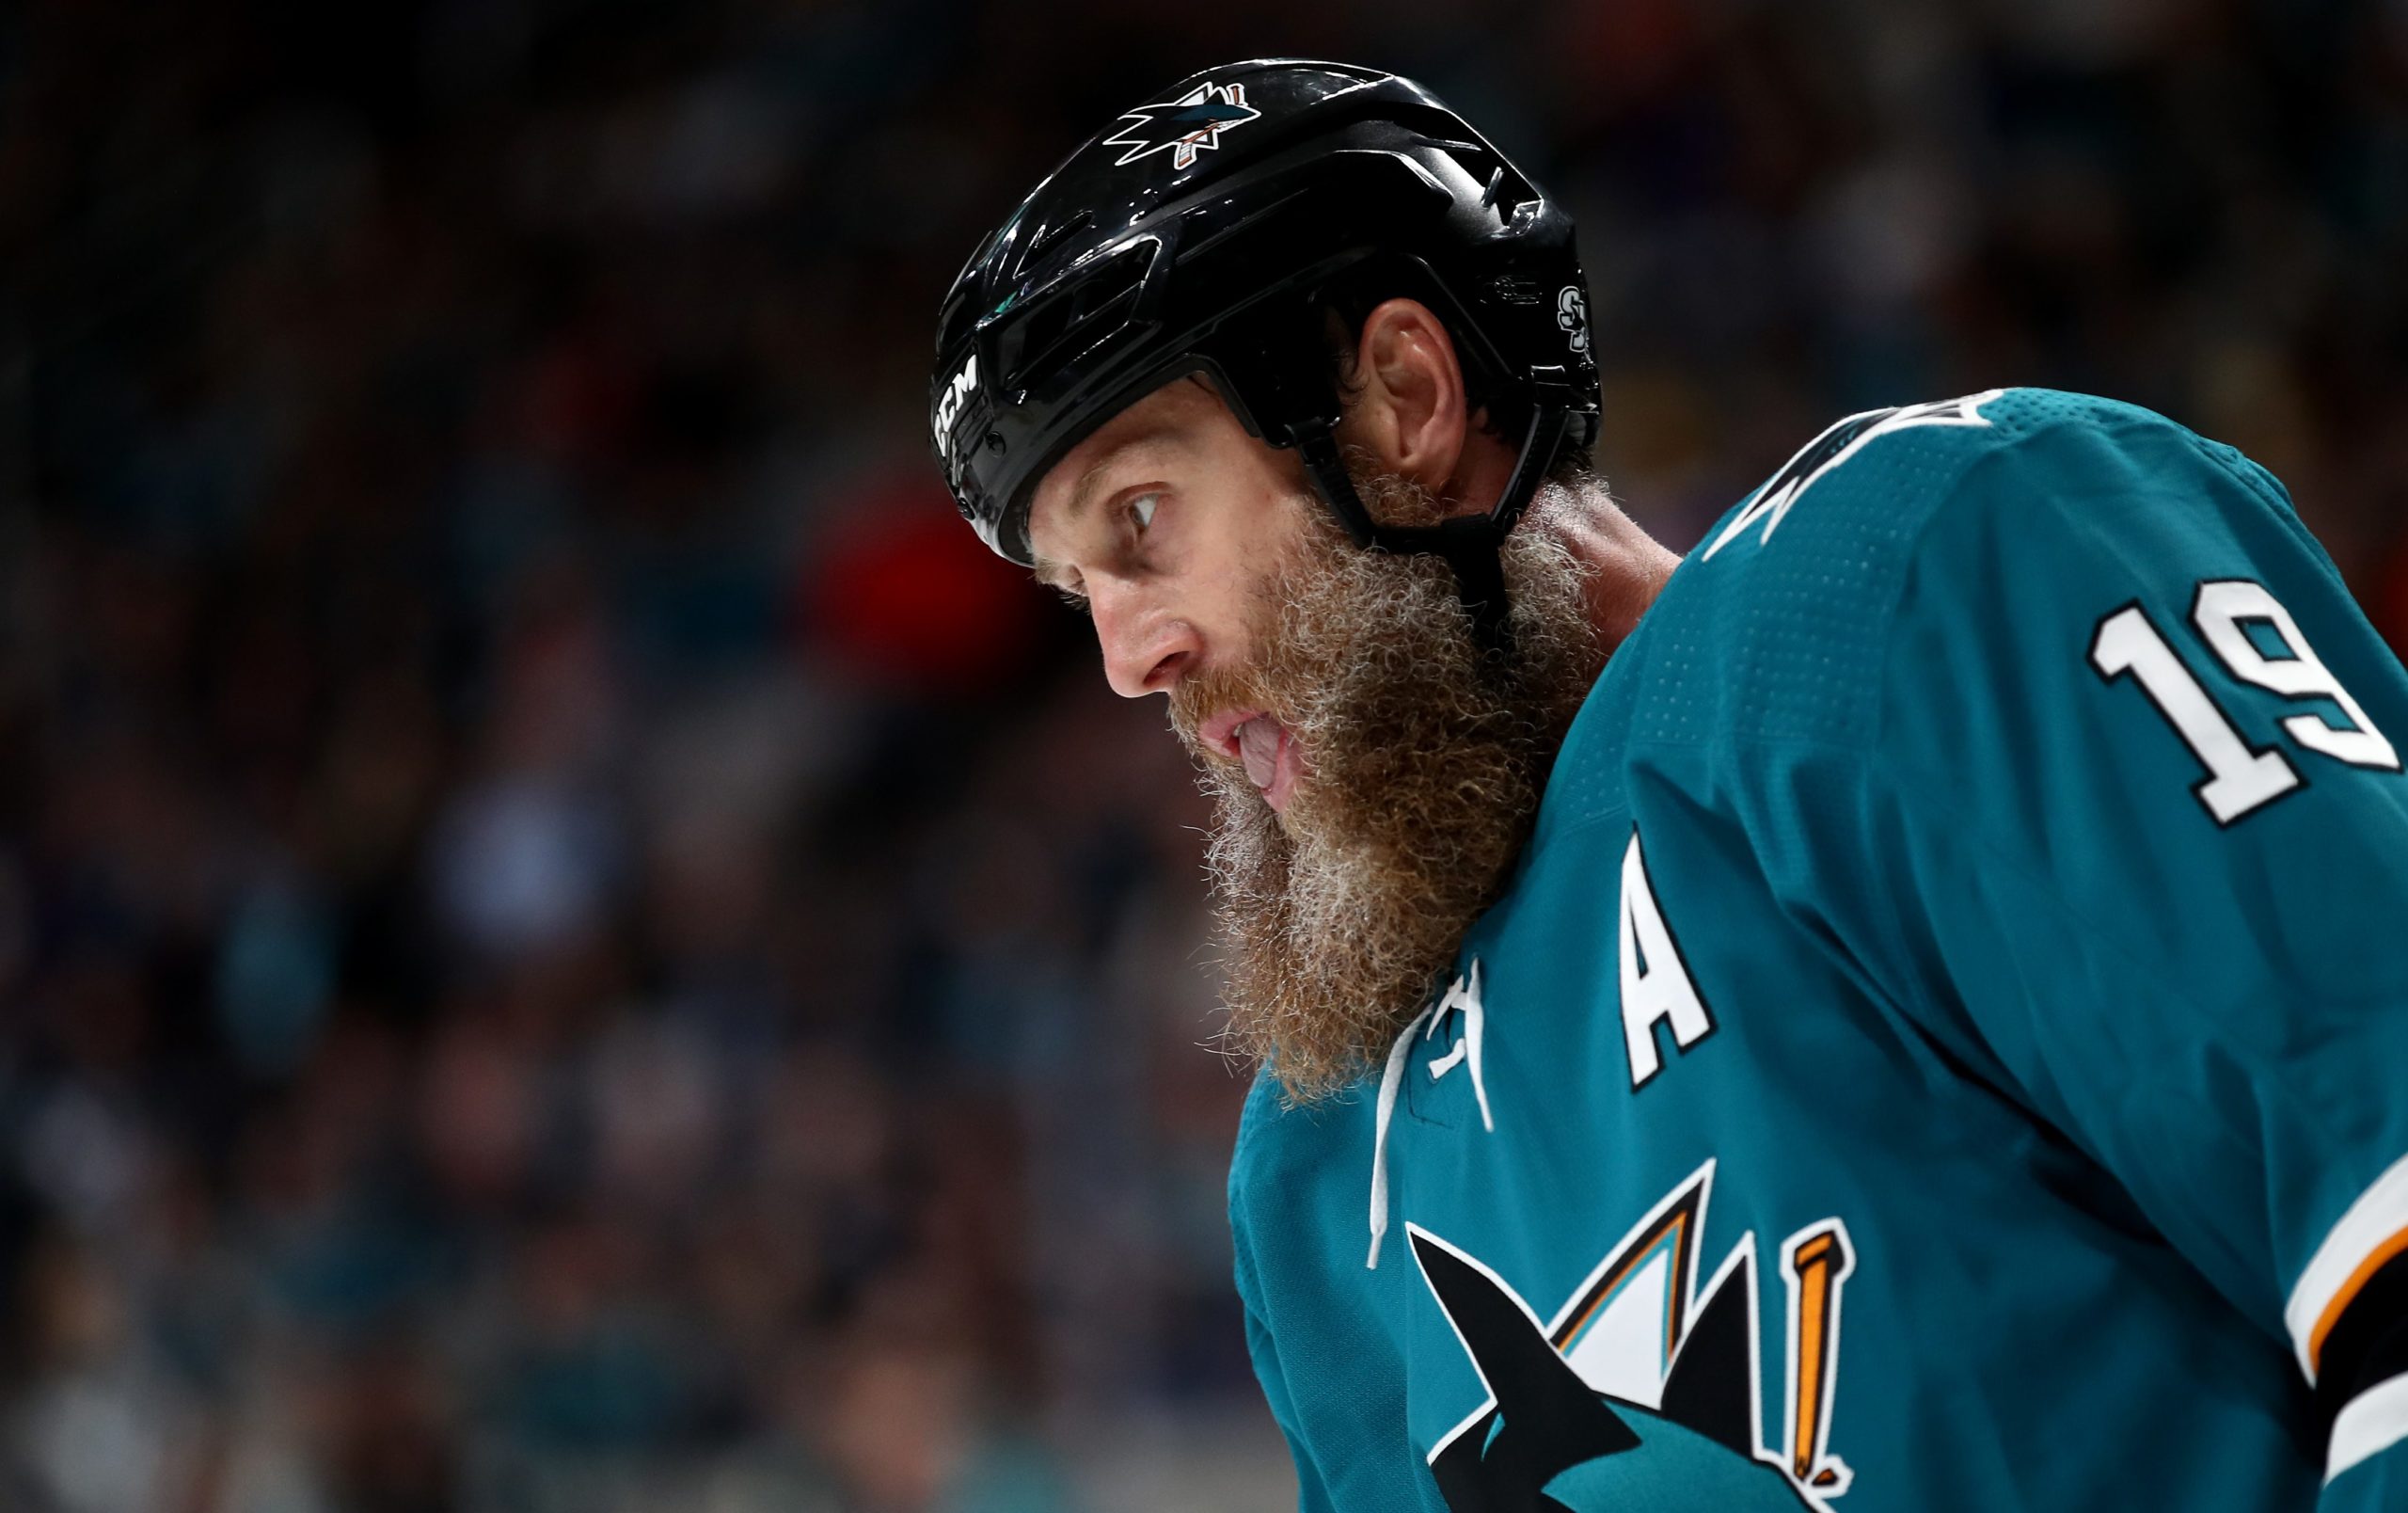 NHL: Sharks' Joe Thornton's hit on Tomas Nosek could be reviewed